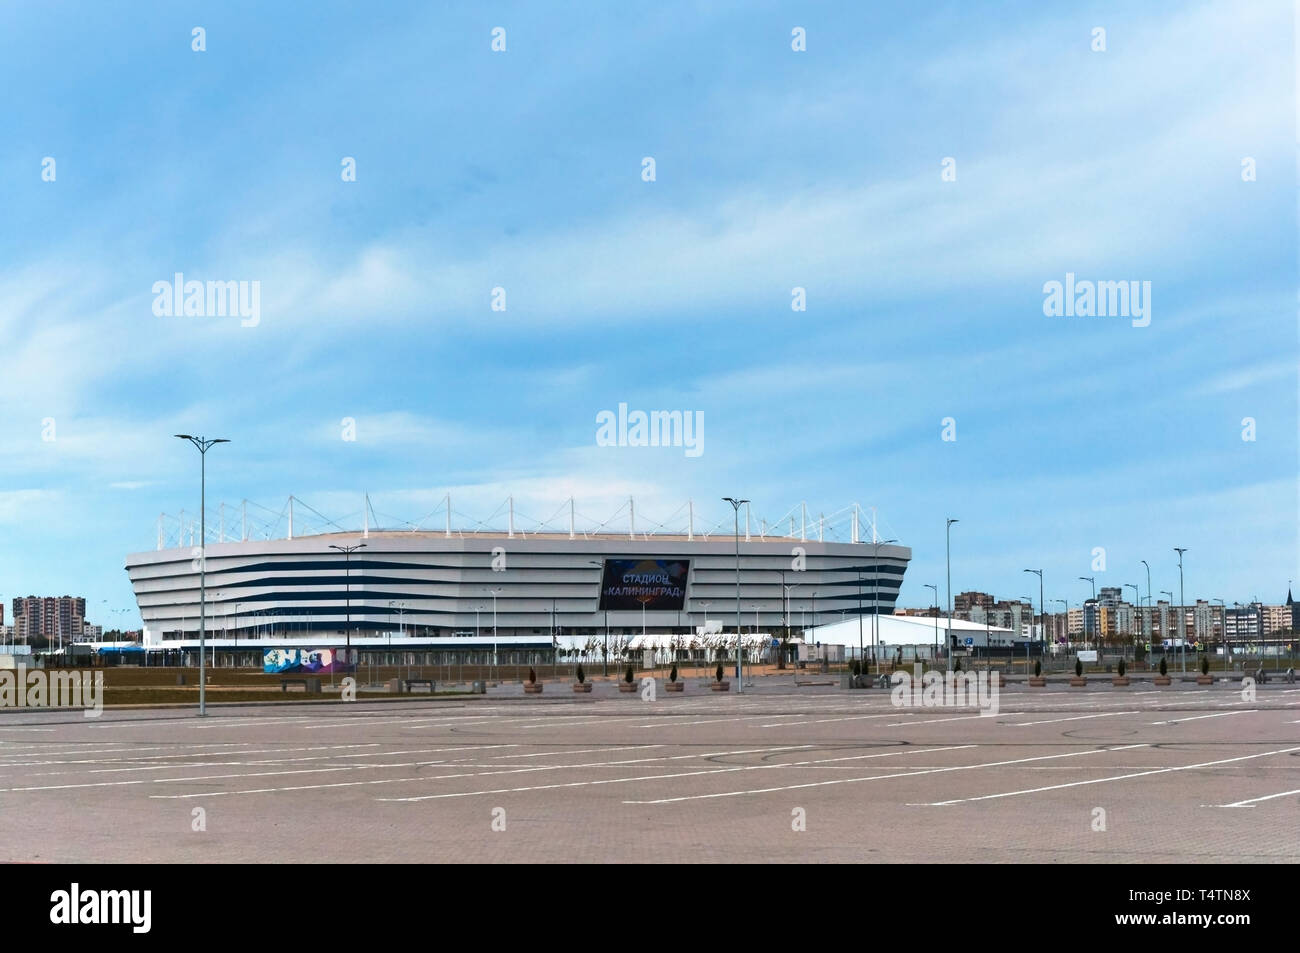 Kaliningrad, Russia, September 30, 2019. Football stadium built for the world Cup 2018. A modern sports facility. Sports construction. Stock Photo